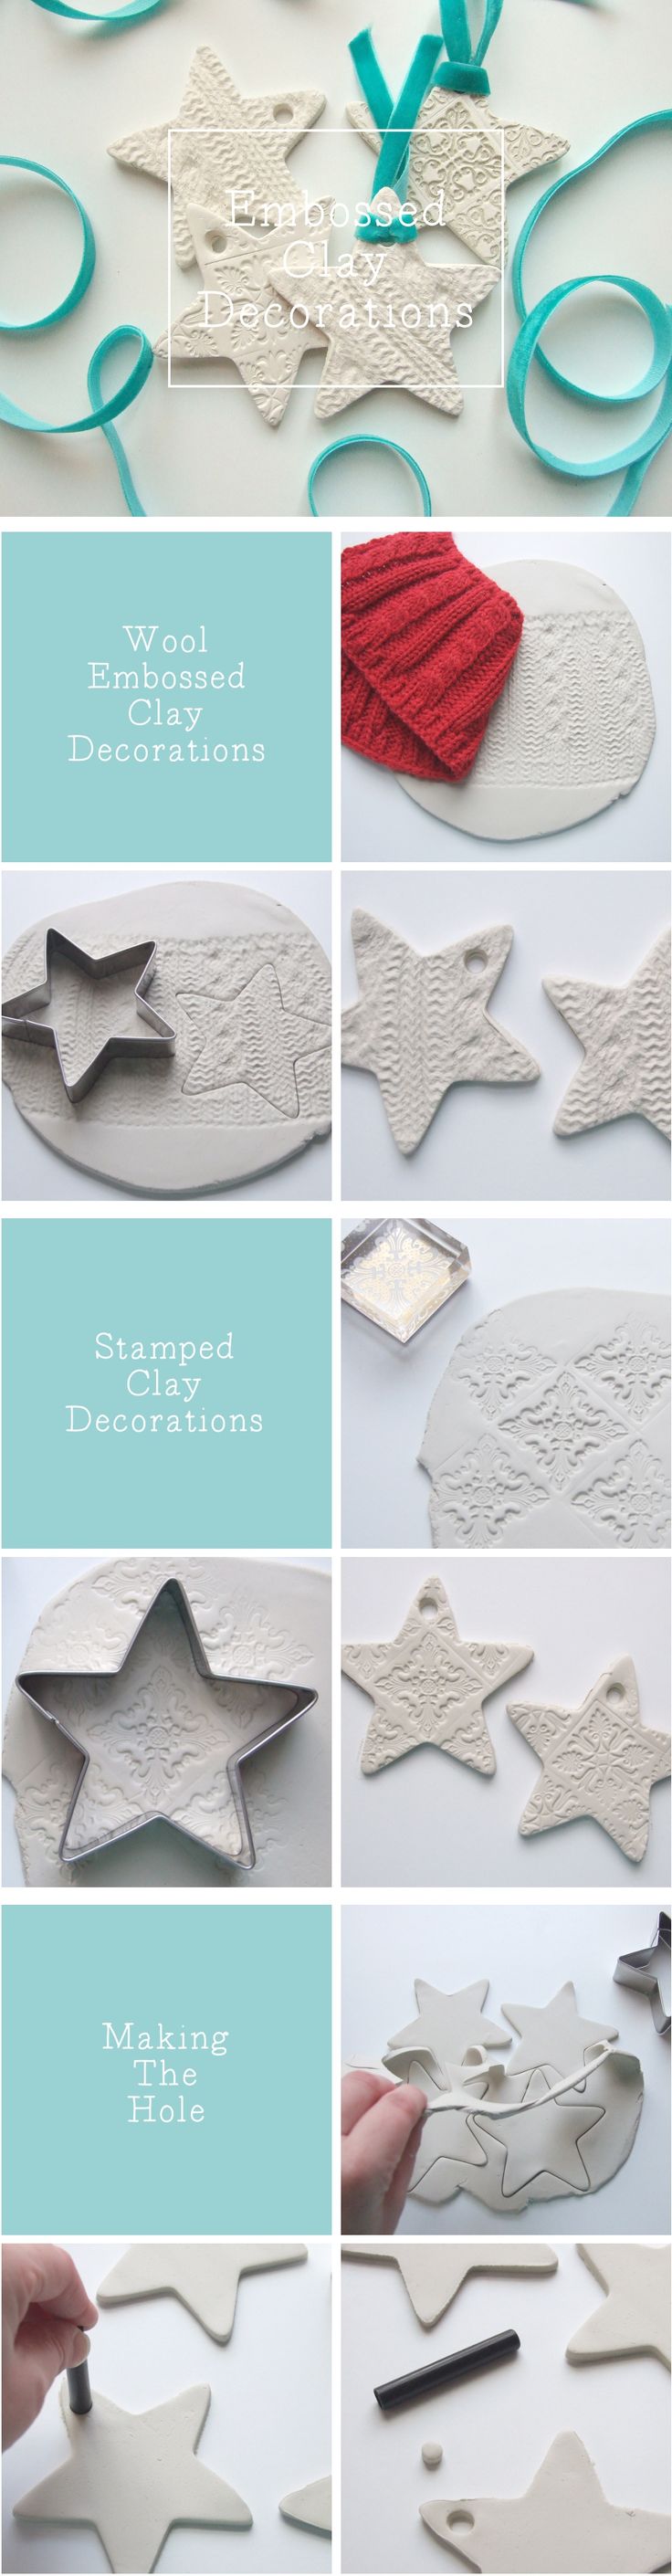 Embossed clay star christmas decorations made using air dry clay. Polymer clay c...